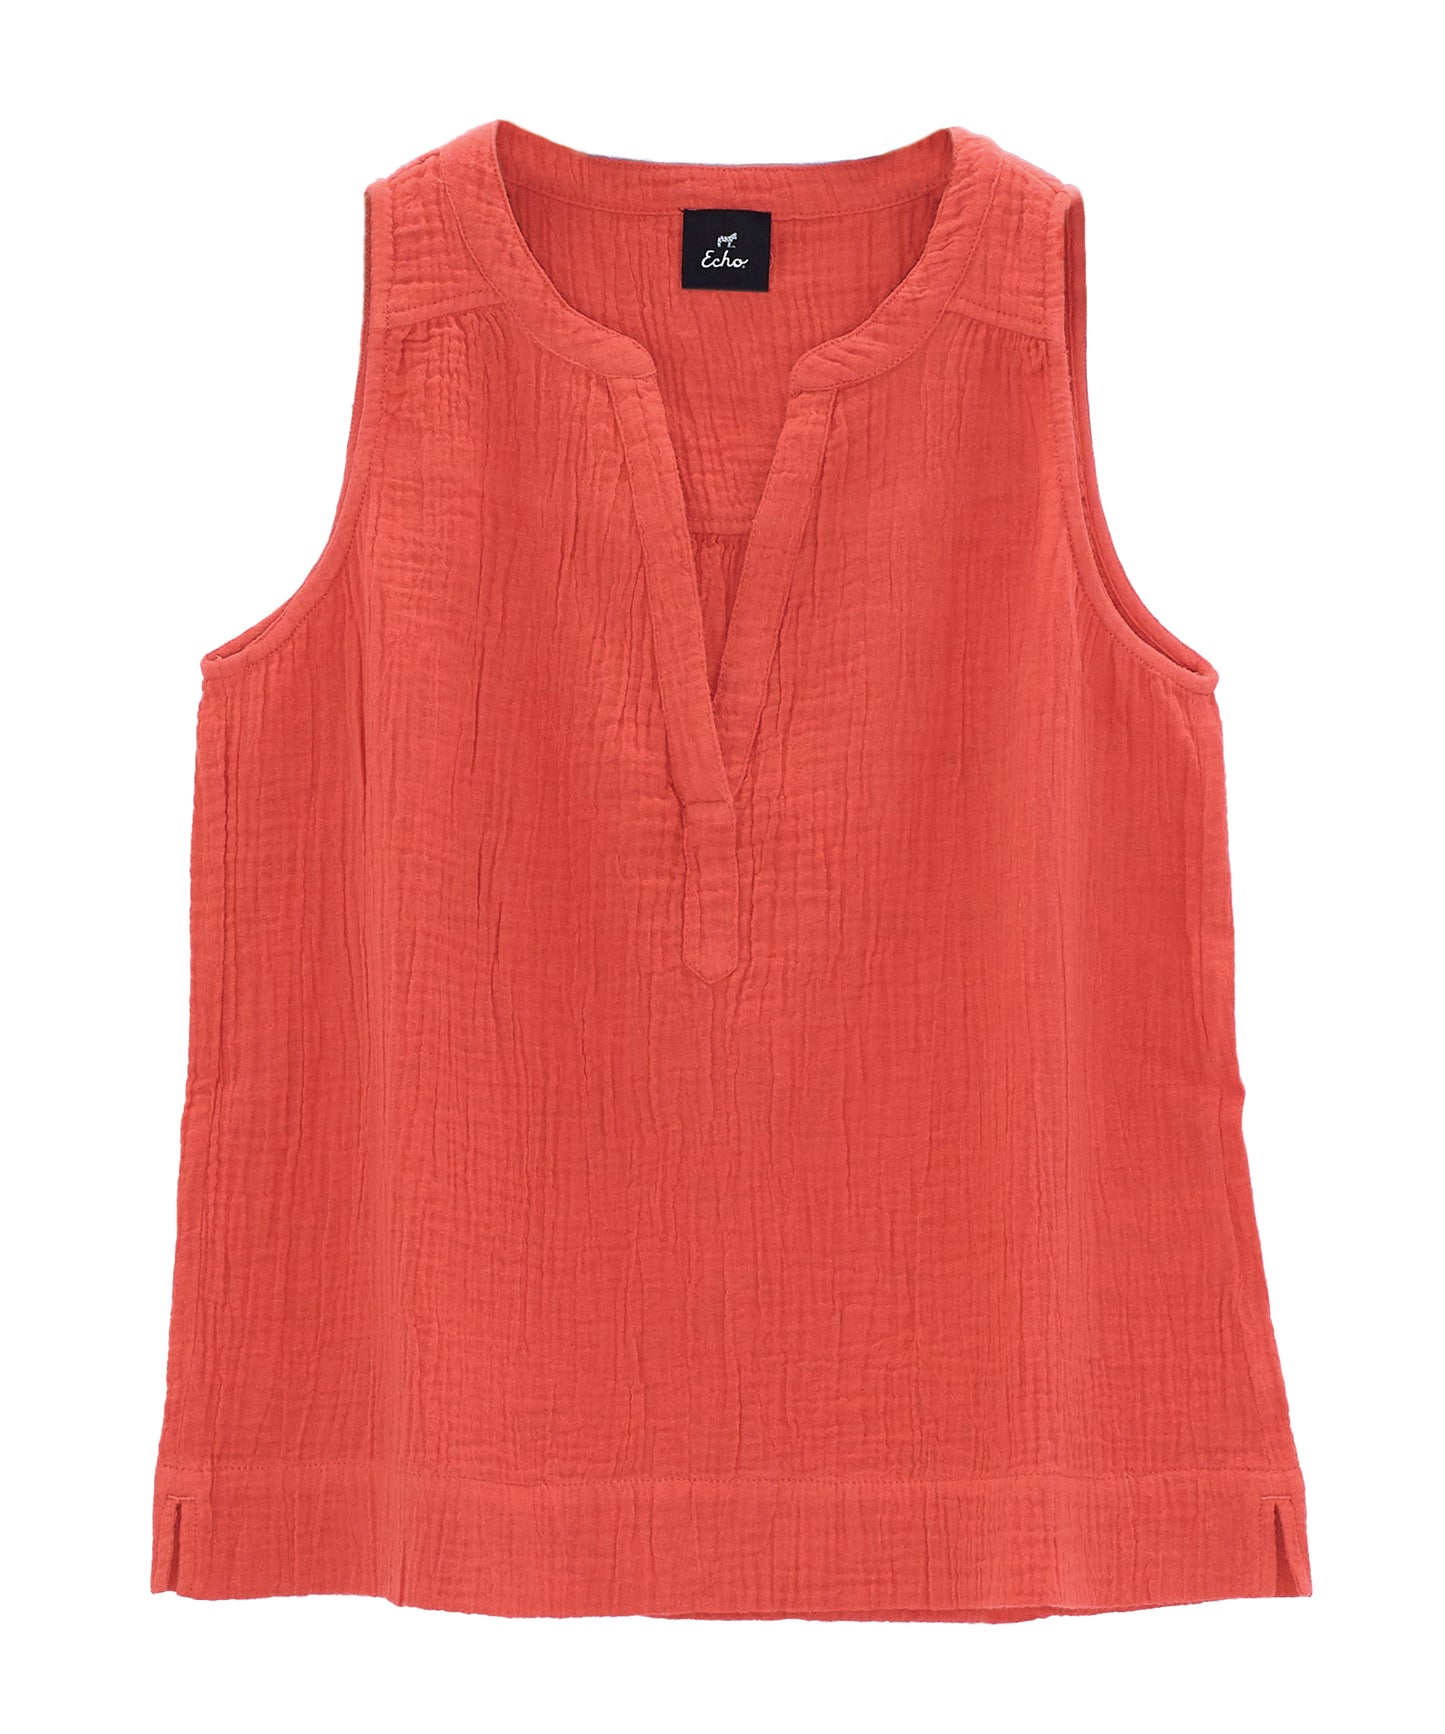 Double Gauze Sleeveless Top in color Emberglow